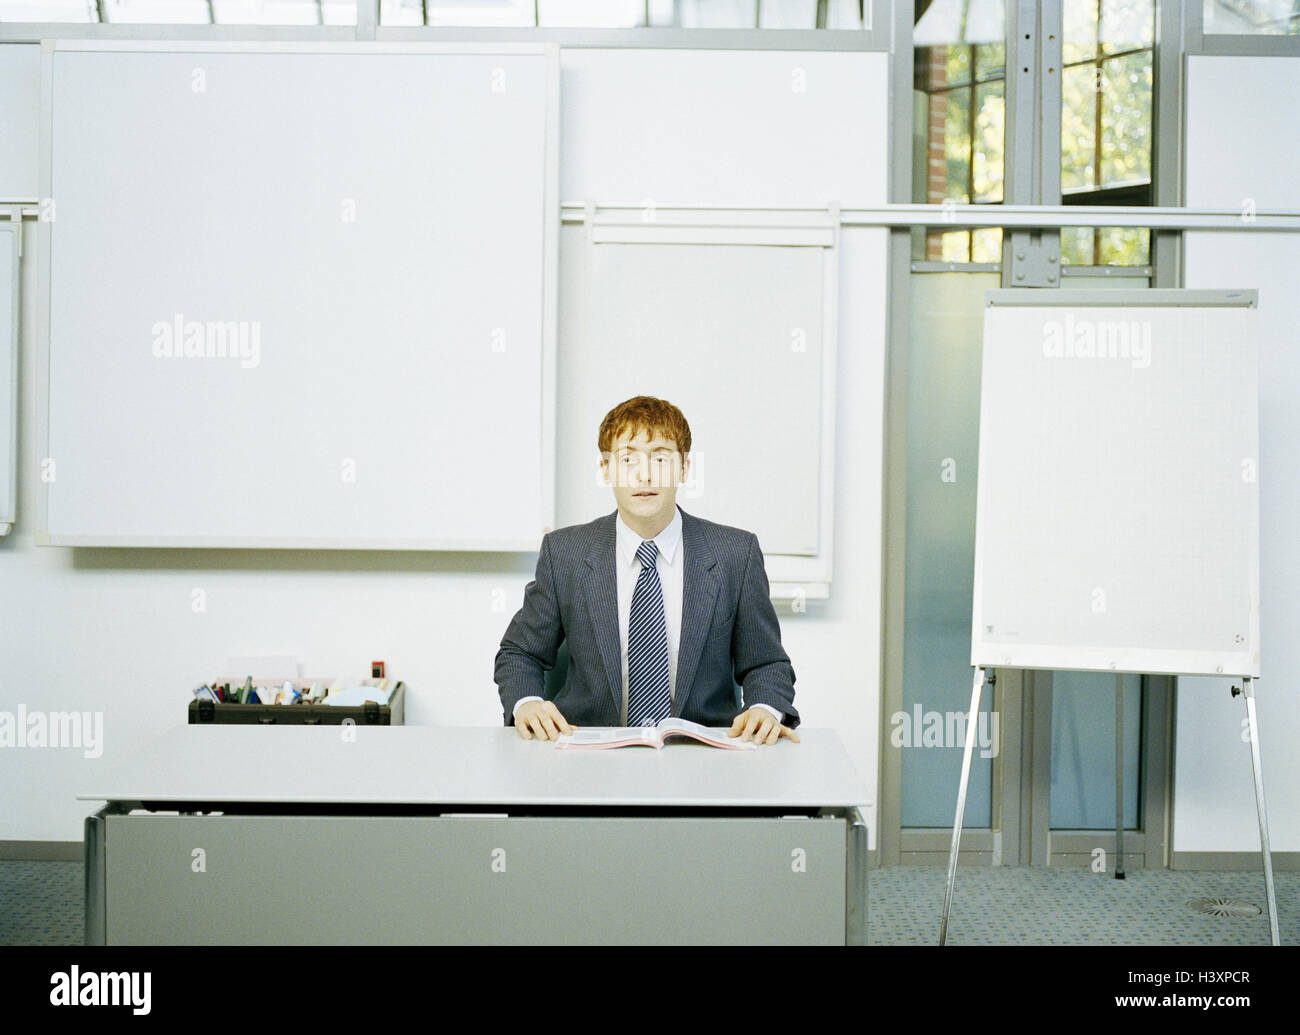 Classrooms, notice board, teacher, inform, business, businessman, man, seminar conductor, seminar, school, lessons, course, perform, information, explanation, education, presentation, training, self-confidently, confidently, occupation Stock Photo